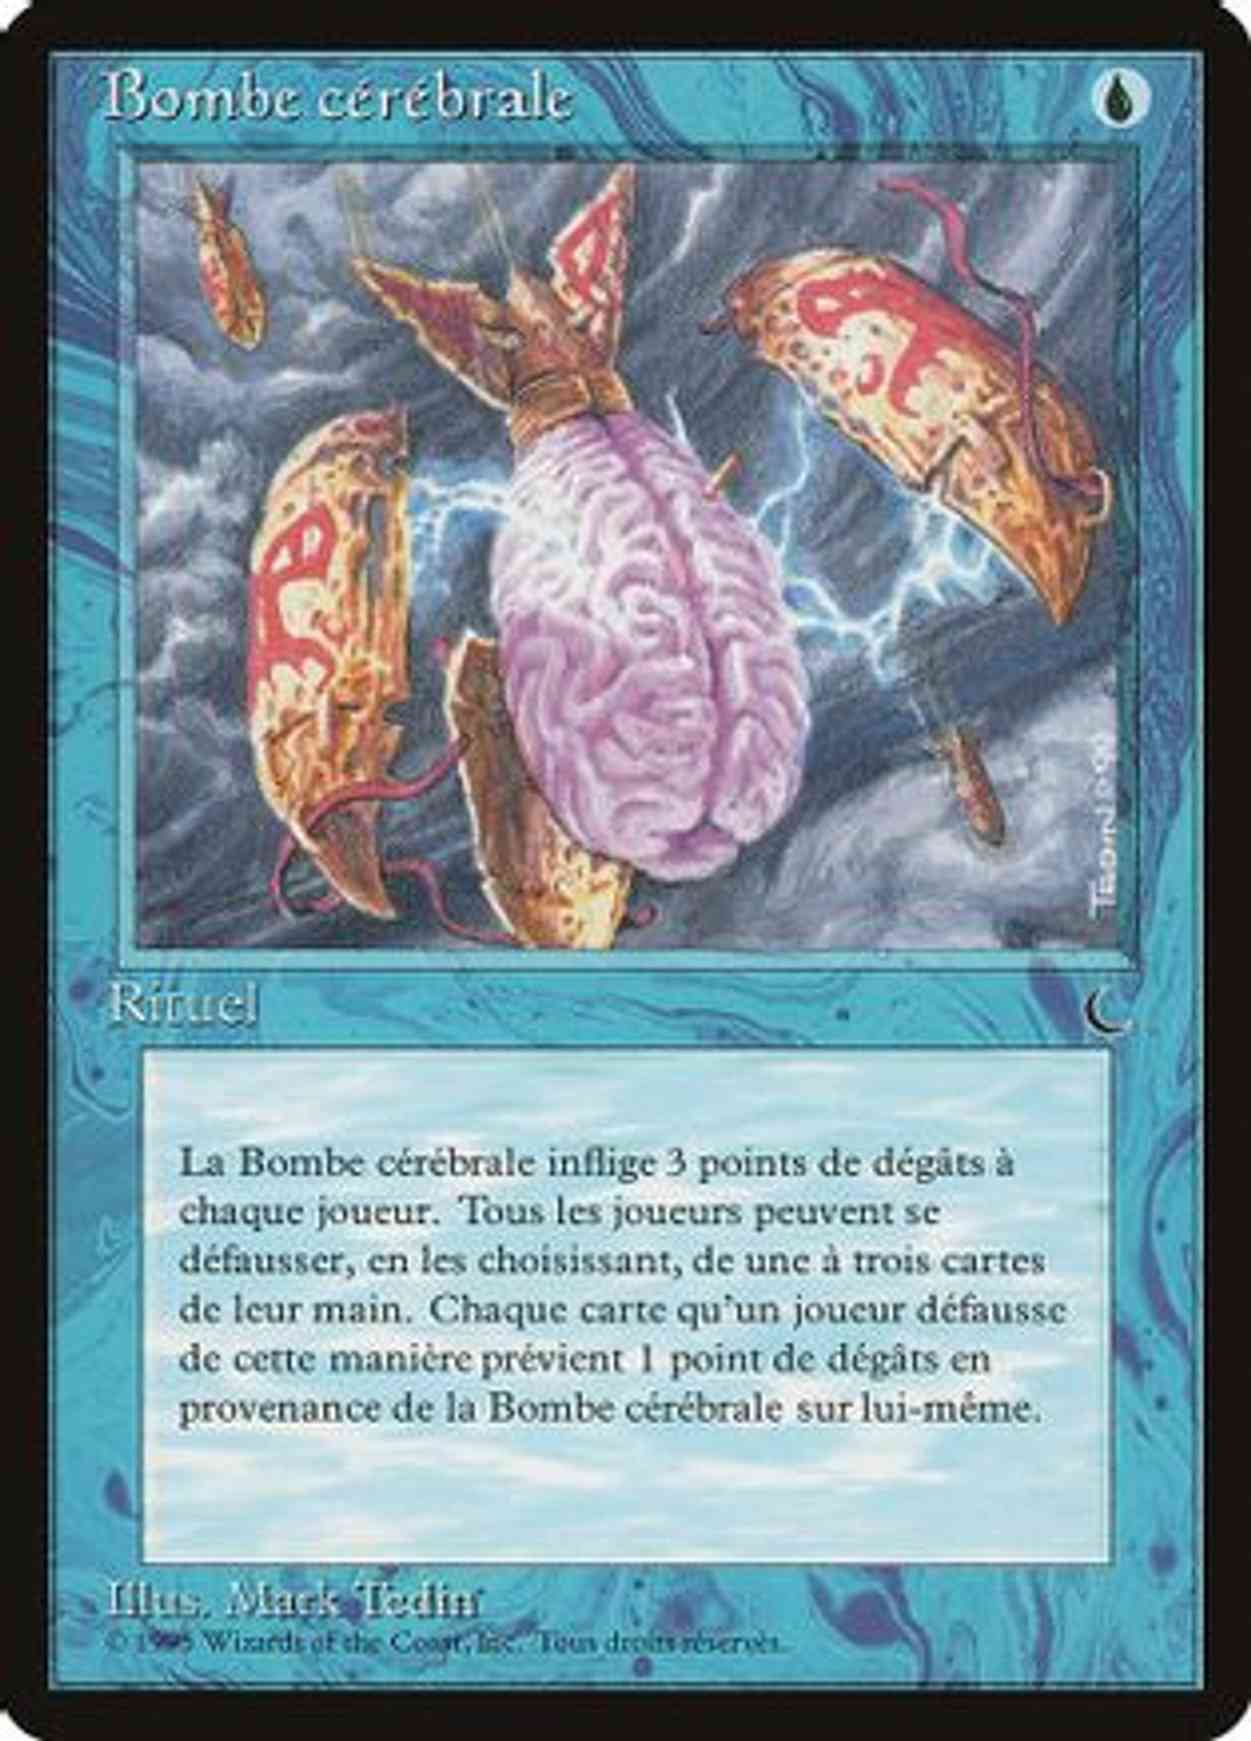 Mind Bomb (French) - "Bombe cerebrale" magic card front